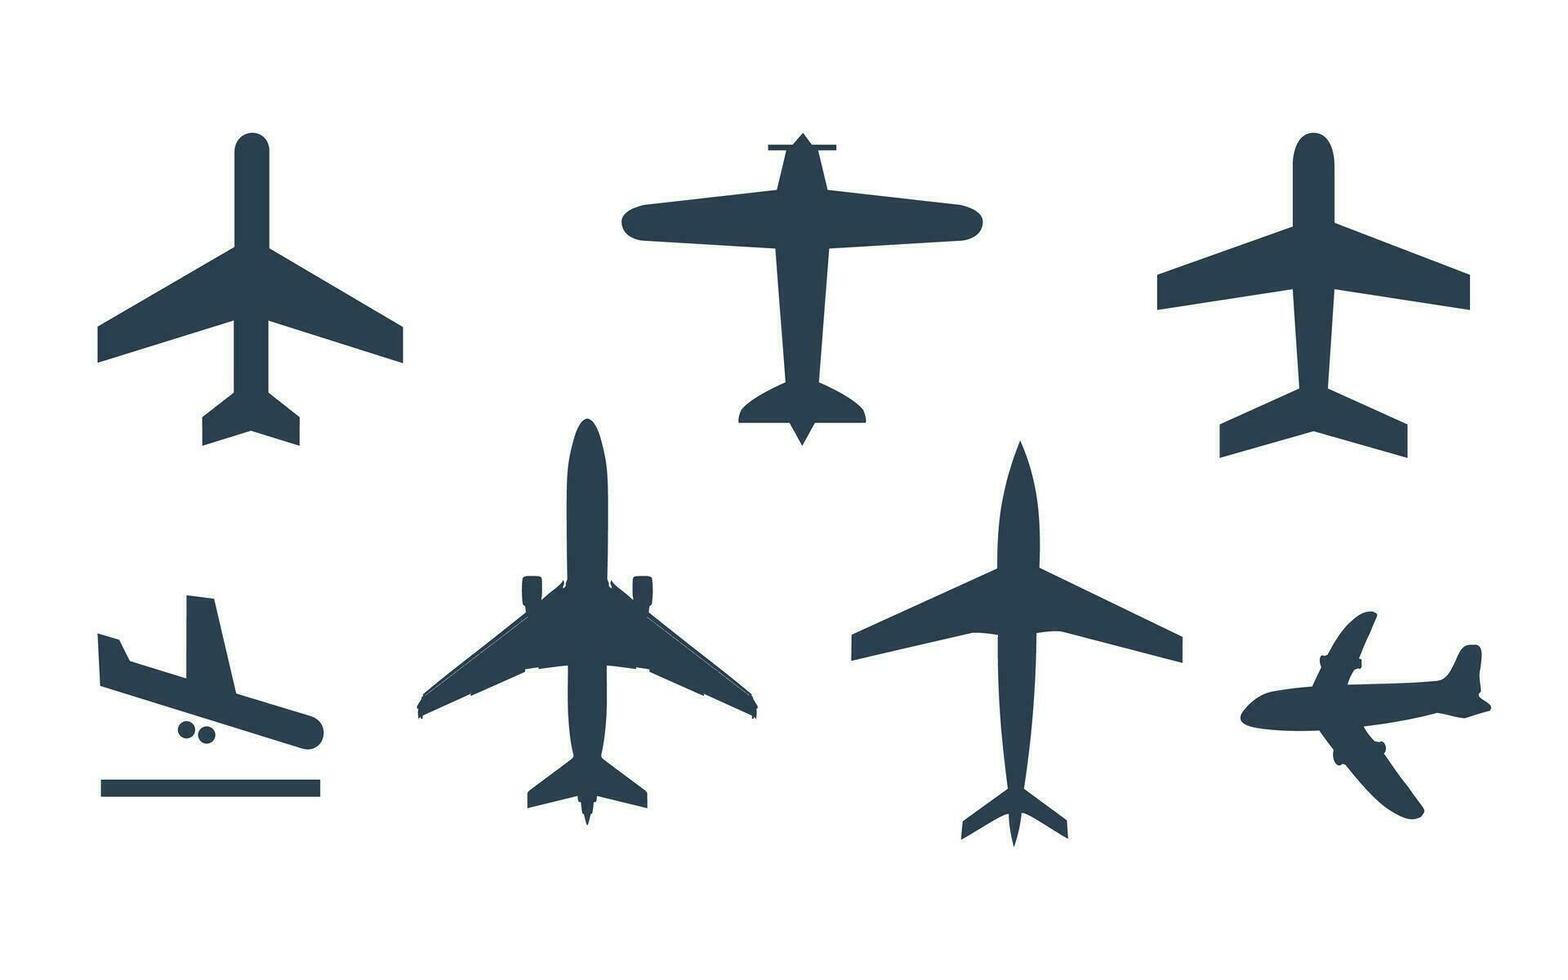 Airplane icons set. Airplane silhouette. Airplane vector illustration